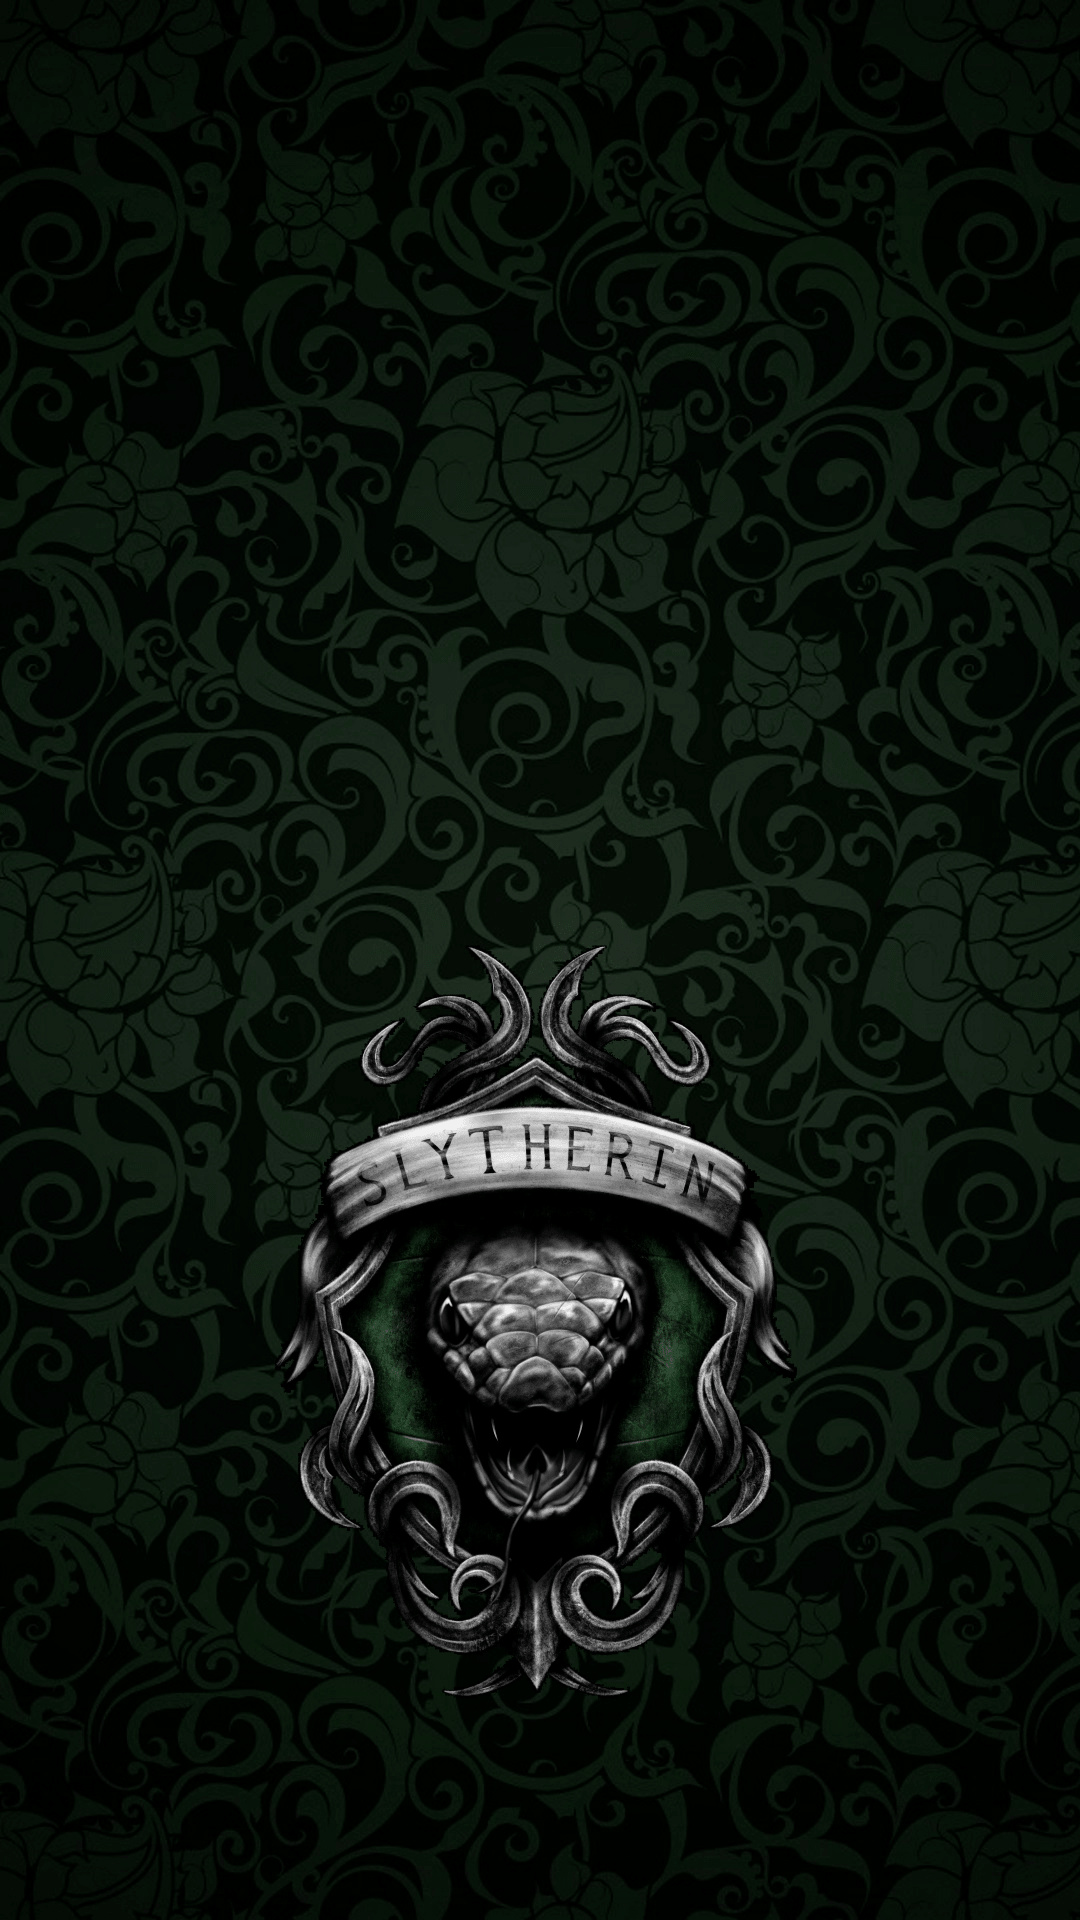 Slytherin wallpaper download, Desktop and mobile, Wide range, Wallpaper collection, 1080x1920 Full HD Handy